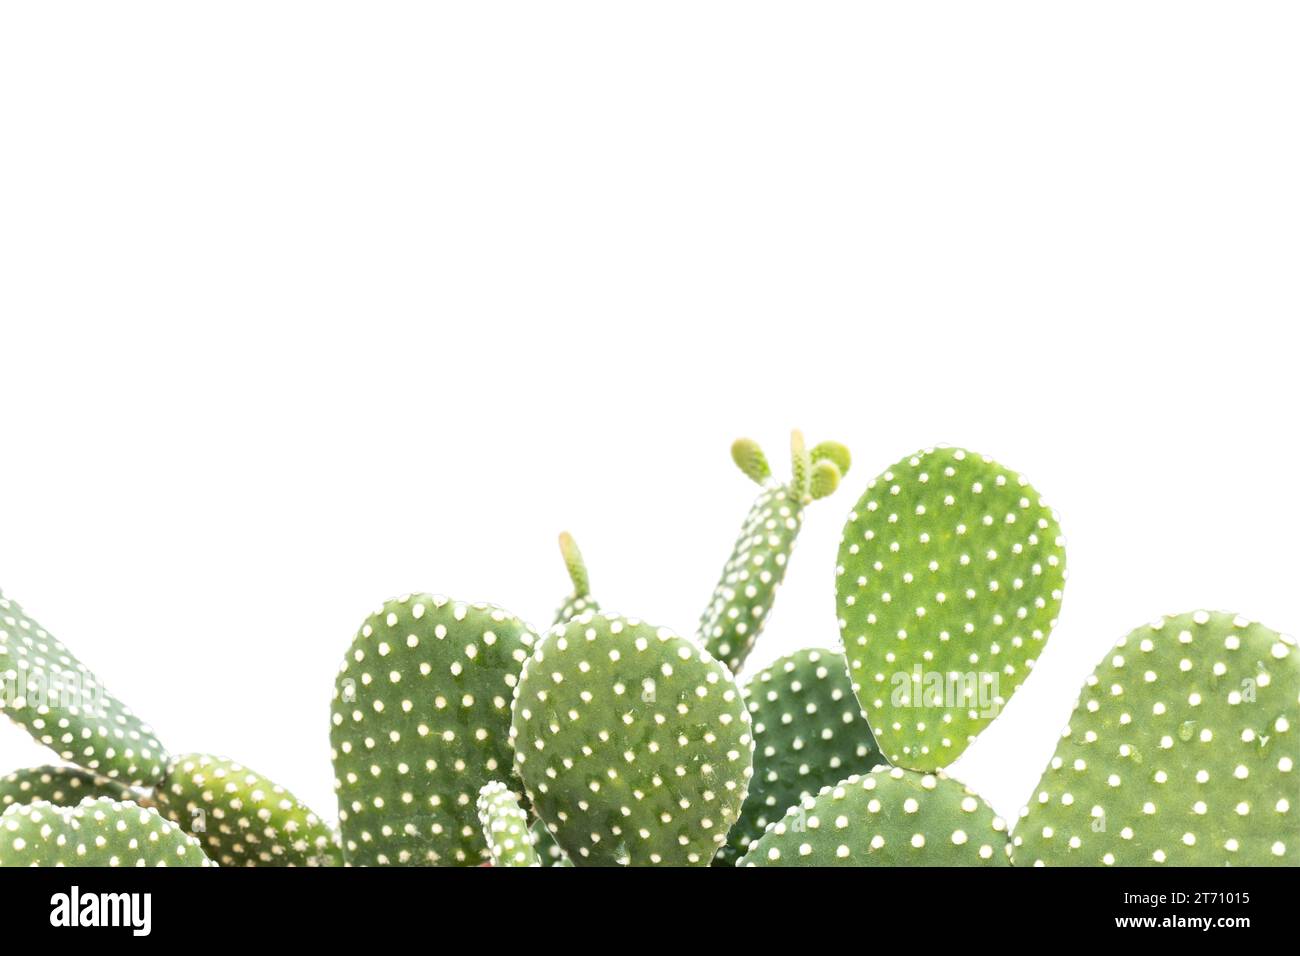 White dotted bunny ears cactus with blank space for text Stock Photo